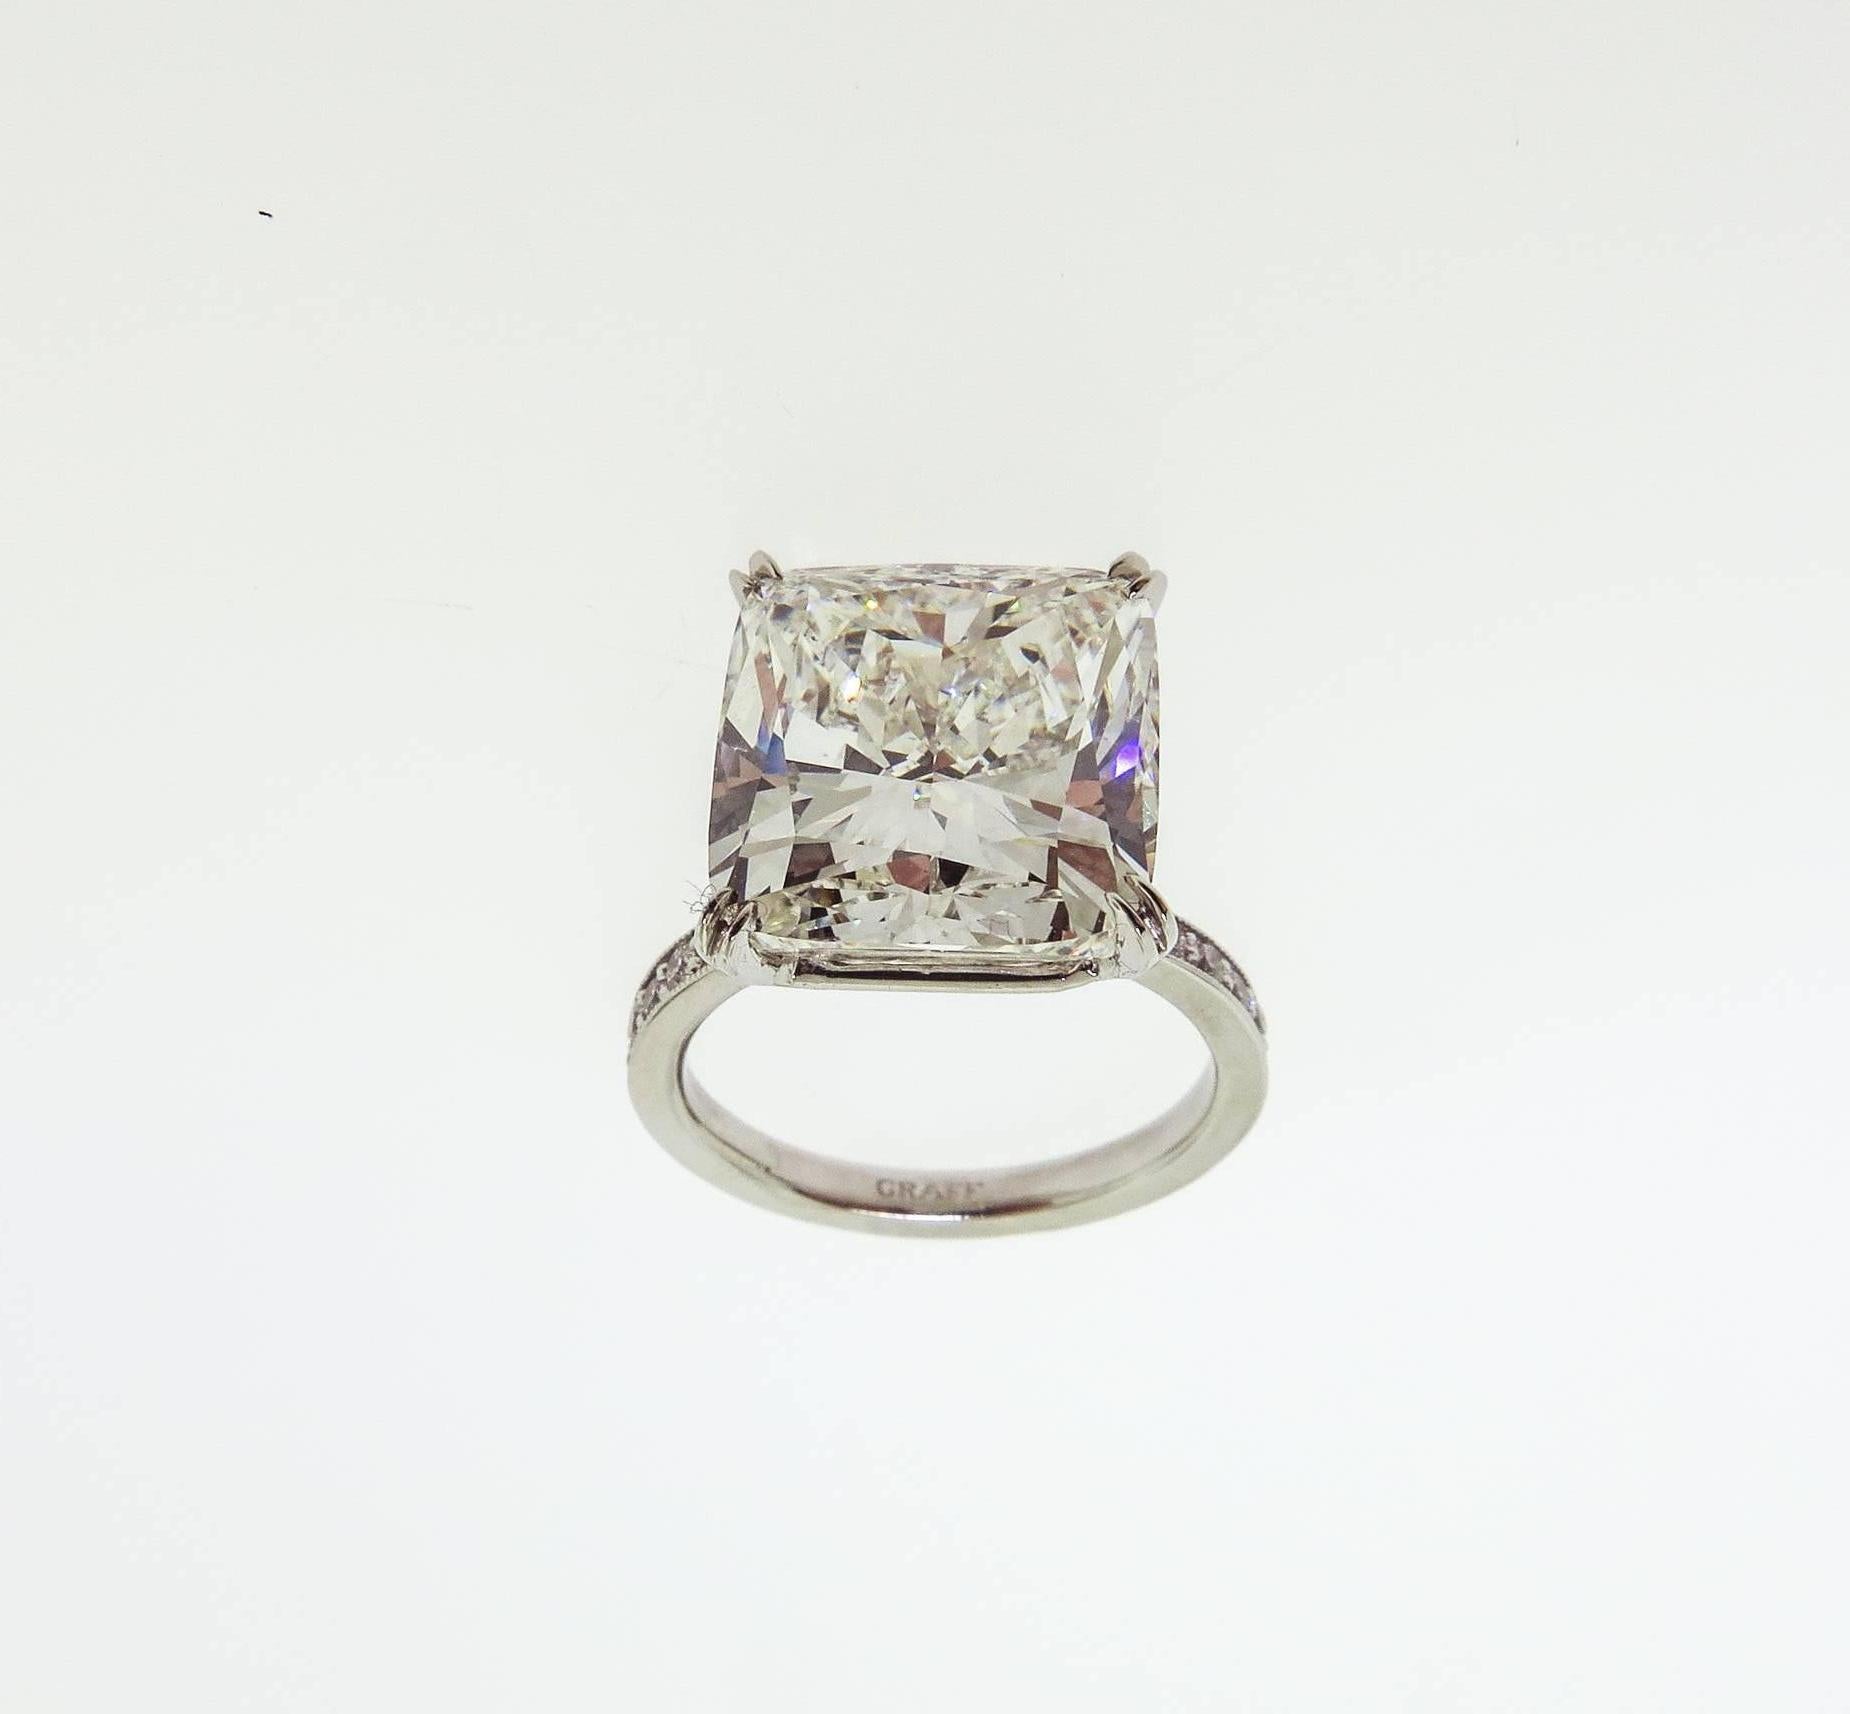 A gorgeous, bright white and beautiful 9.34 carat cushion-cut diamond set exquisitely in a beaded diamond eternity band creating a continuous flash of fire and scintillation across the finger, accompanied by a GIA Diamond Grading Report stating: H